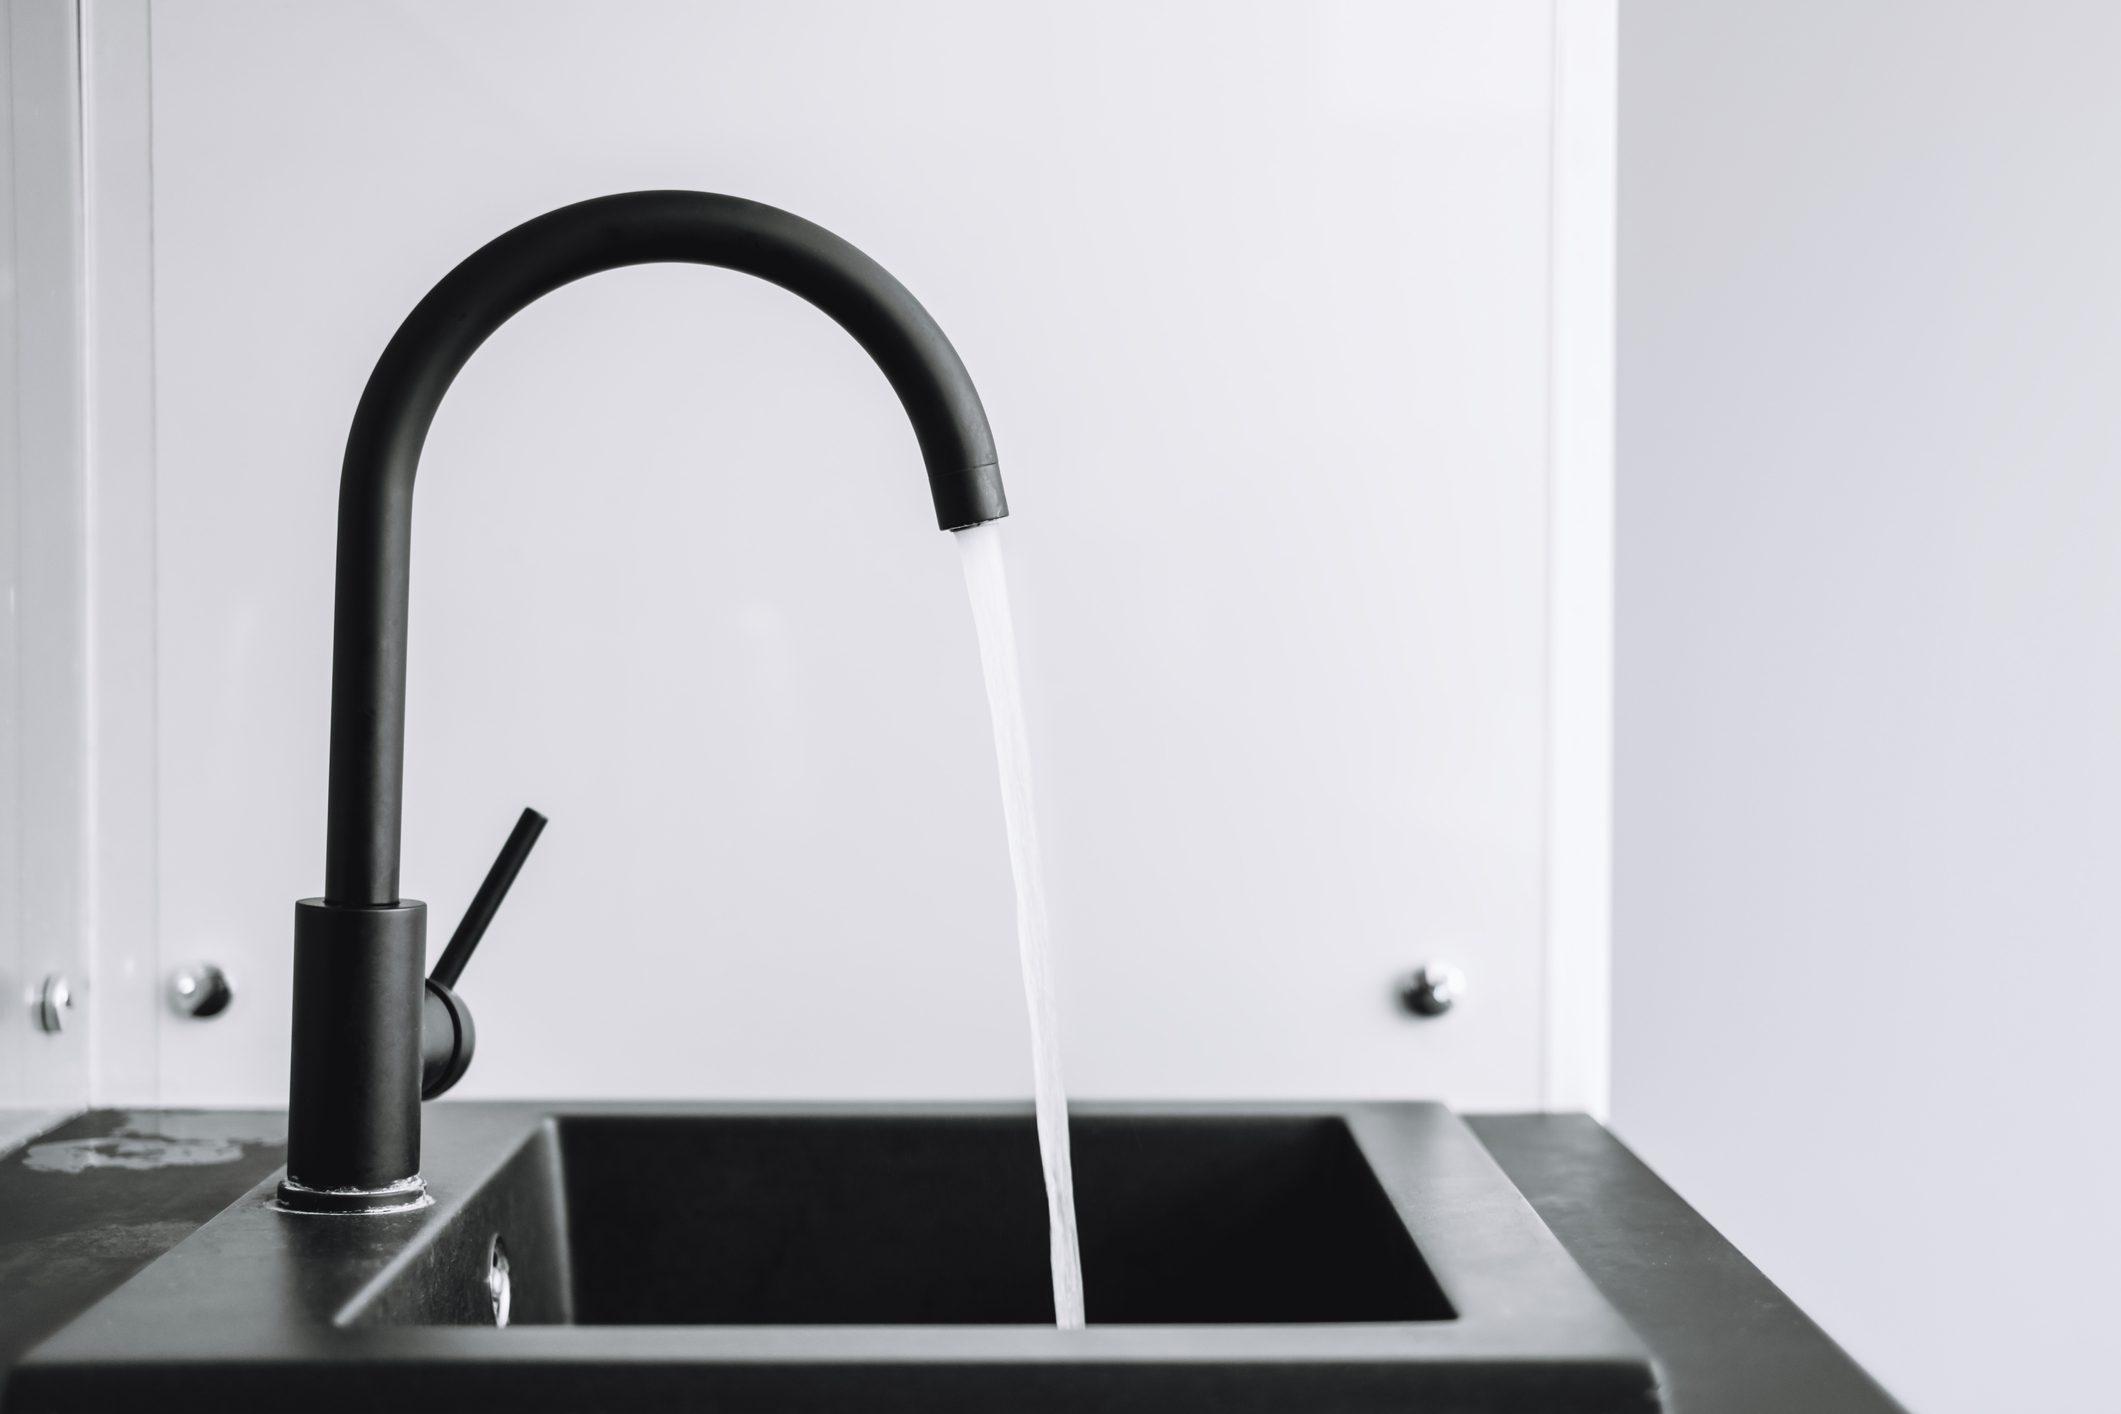 A running tap with the water running in the kitchen. The tap lets the water run.